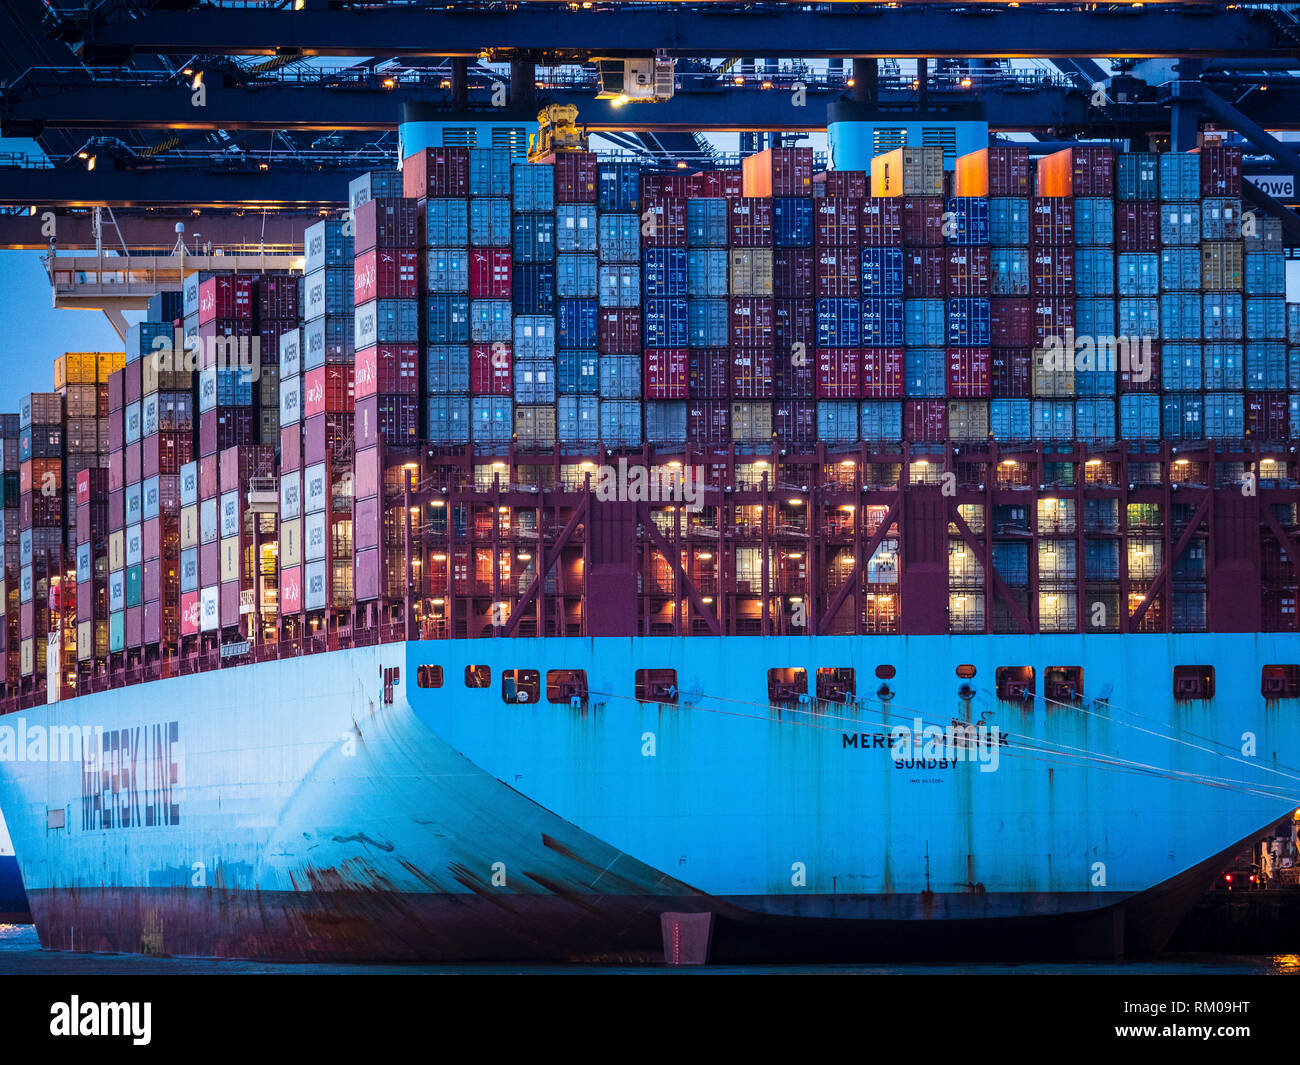 International Trade - Shipping Containers being loaded and unloaded from a Maersk Container Ship in the Port of Felixstowe UK. Stock Photo